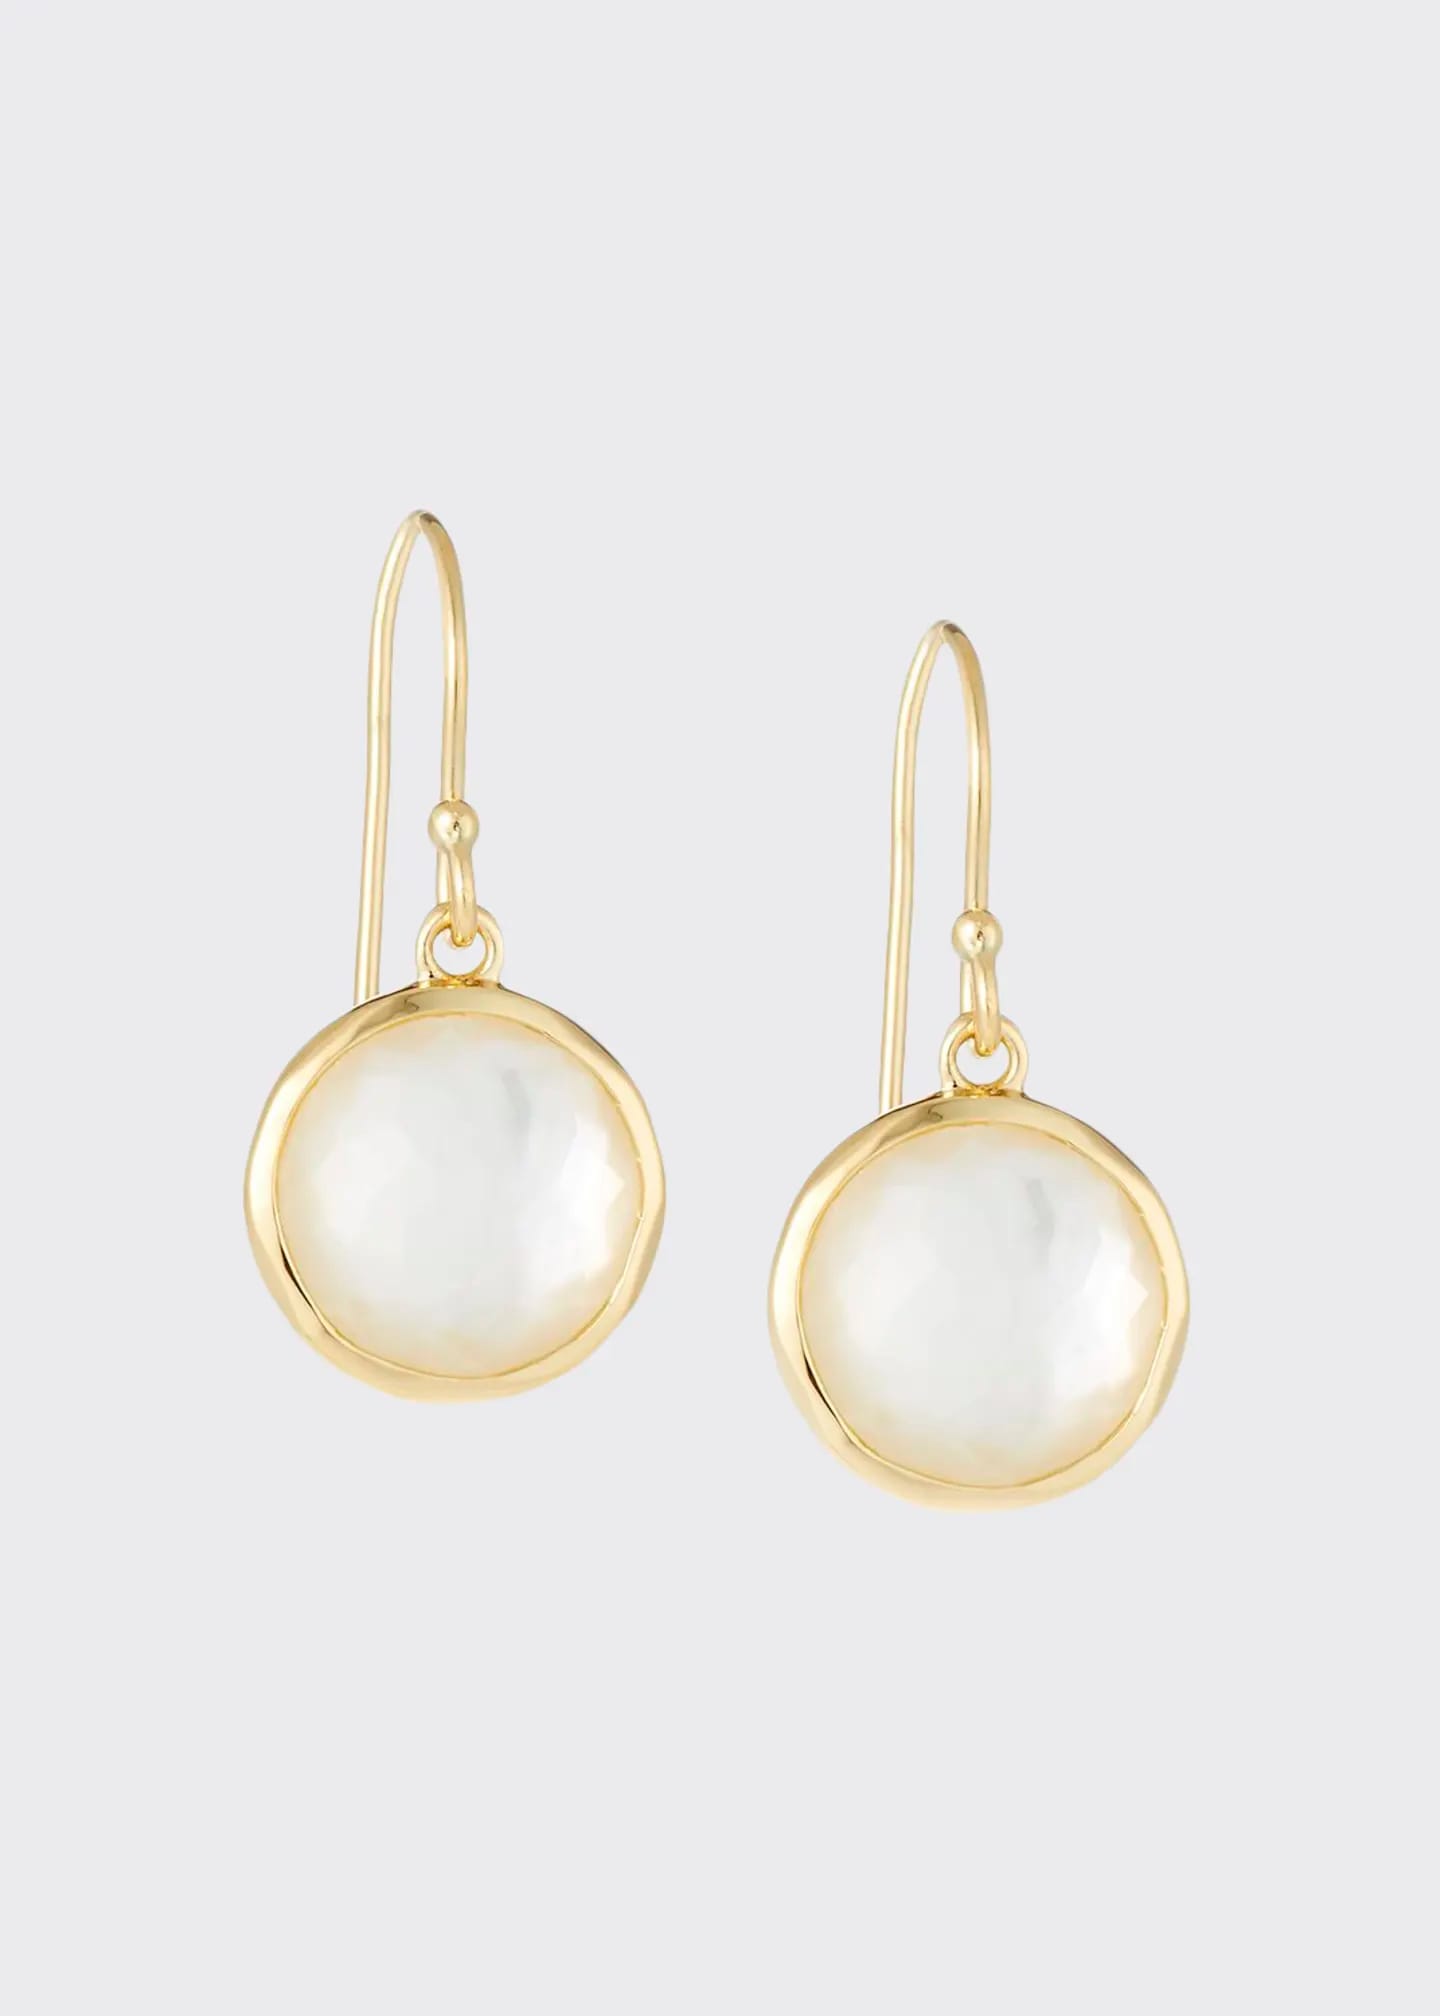 Ippolita Lollipop Mini Earrings In 18k Gold With Clear Quartz And Mother-of-pearl Doublet